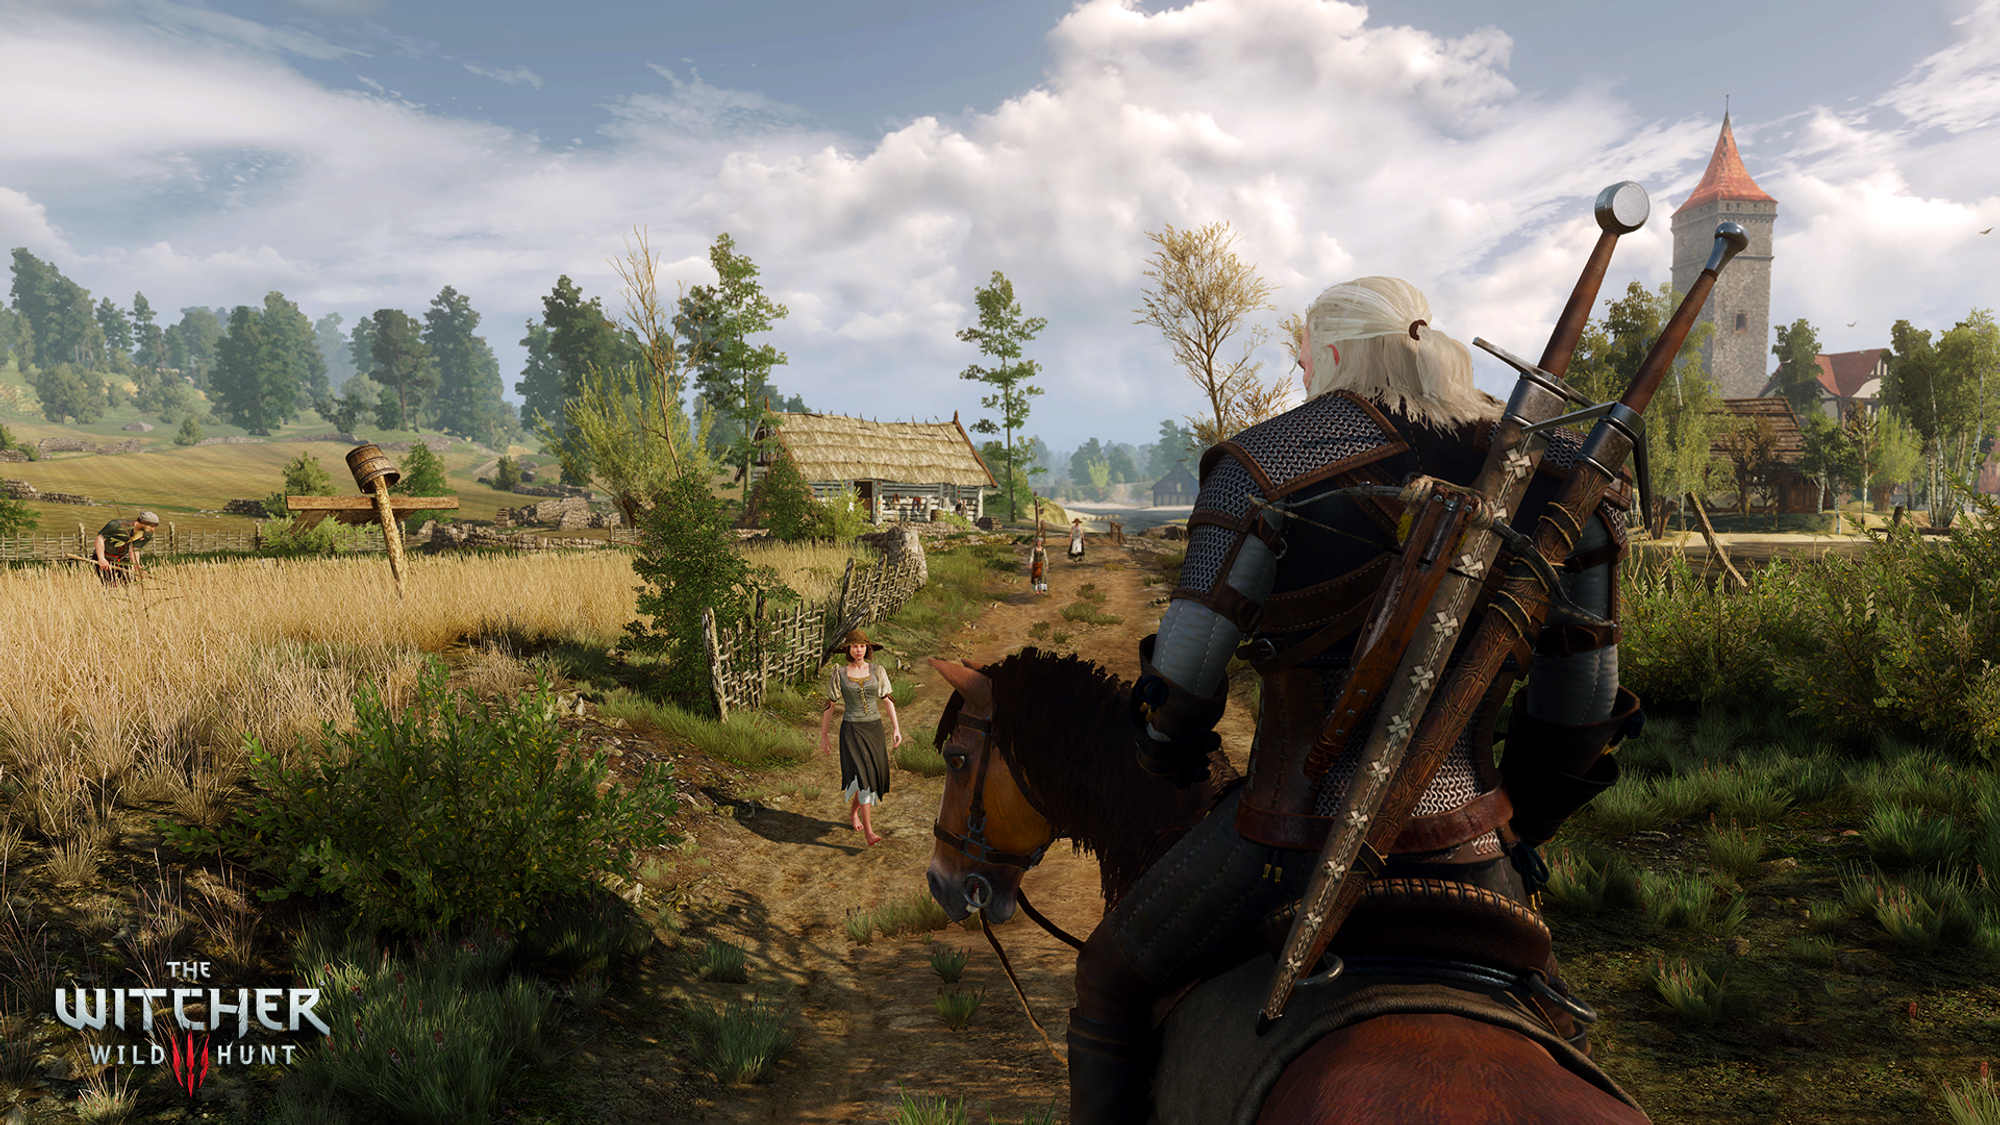 Final Fantasy XV and Type-0 HD Screenshots The-witcher-3-wild-hunt-seems-downright-bucolic-not-necessarily